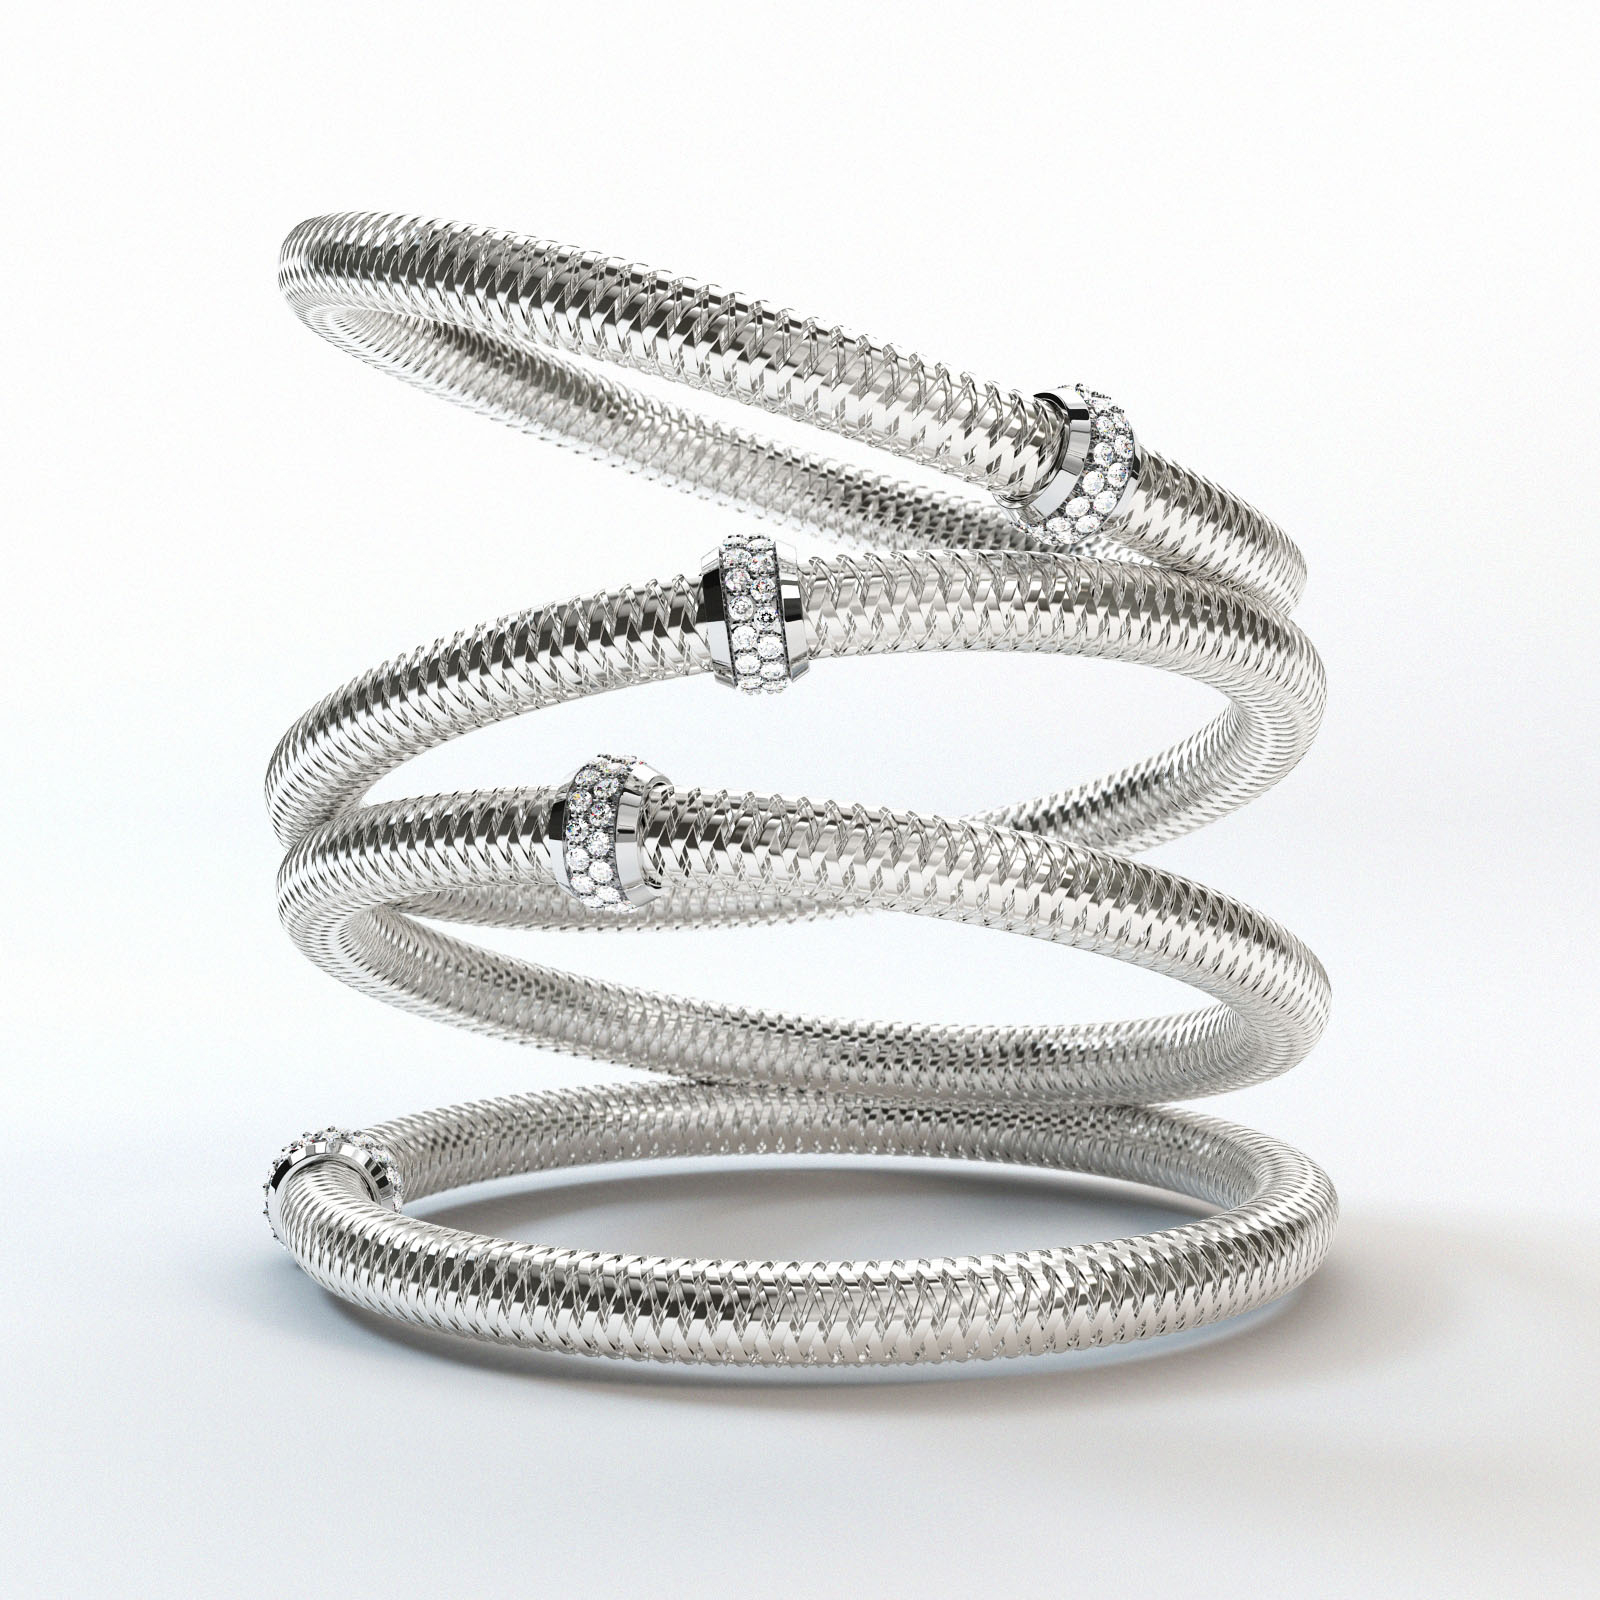 Three silver rings with diamonds, elegant and luxurious. Perfect for any special occasion. Created by 7cgi jewelry rendering service.